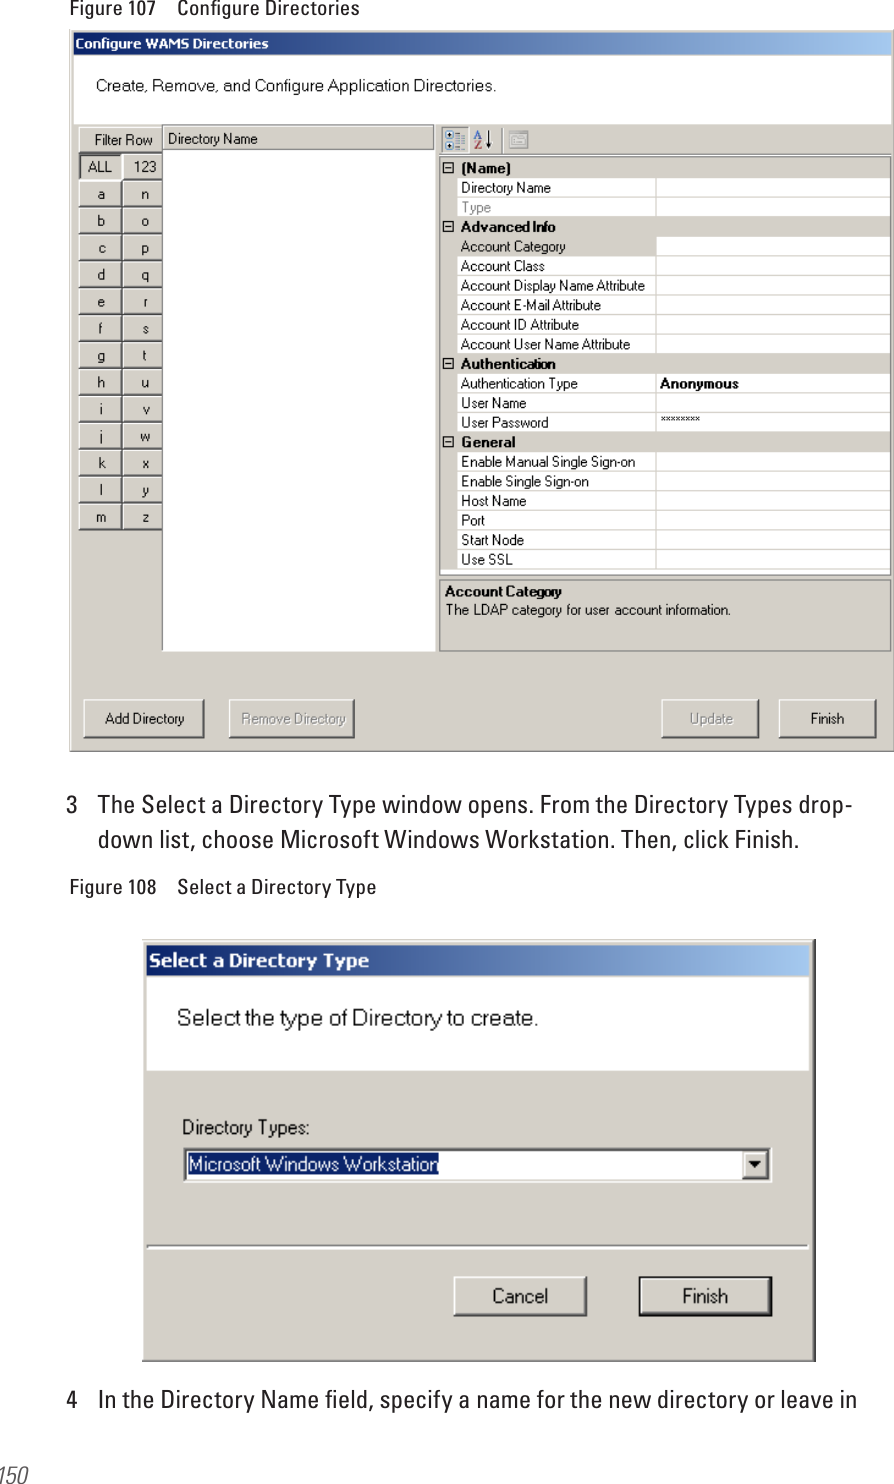 150Figure 107  Conﬁgure Directories3  The Select a Directory Type window opens. From the Directory Types drop-down list, choose Microsoft Windows Workstation. Then, click Finish.Figure 108  Select a Directory Type4  In the Directory Name ﬁeld, specify a name for the new directory or leave in 